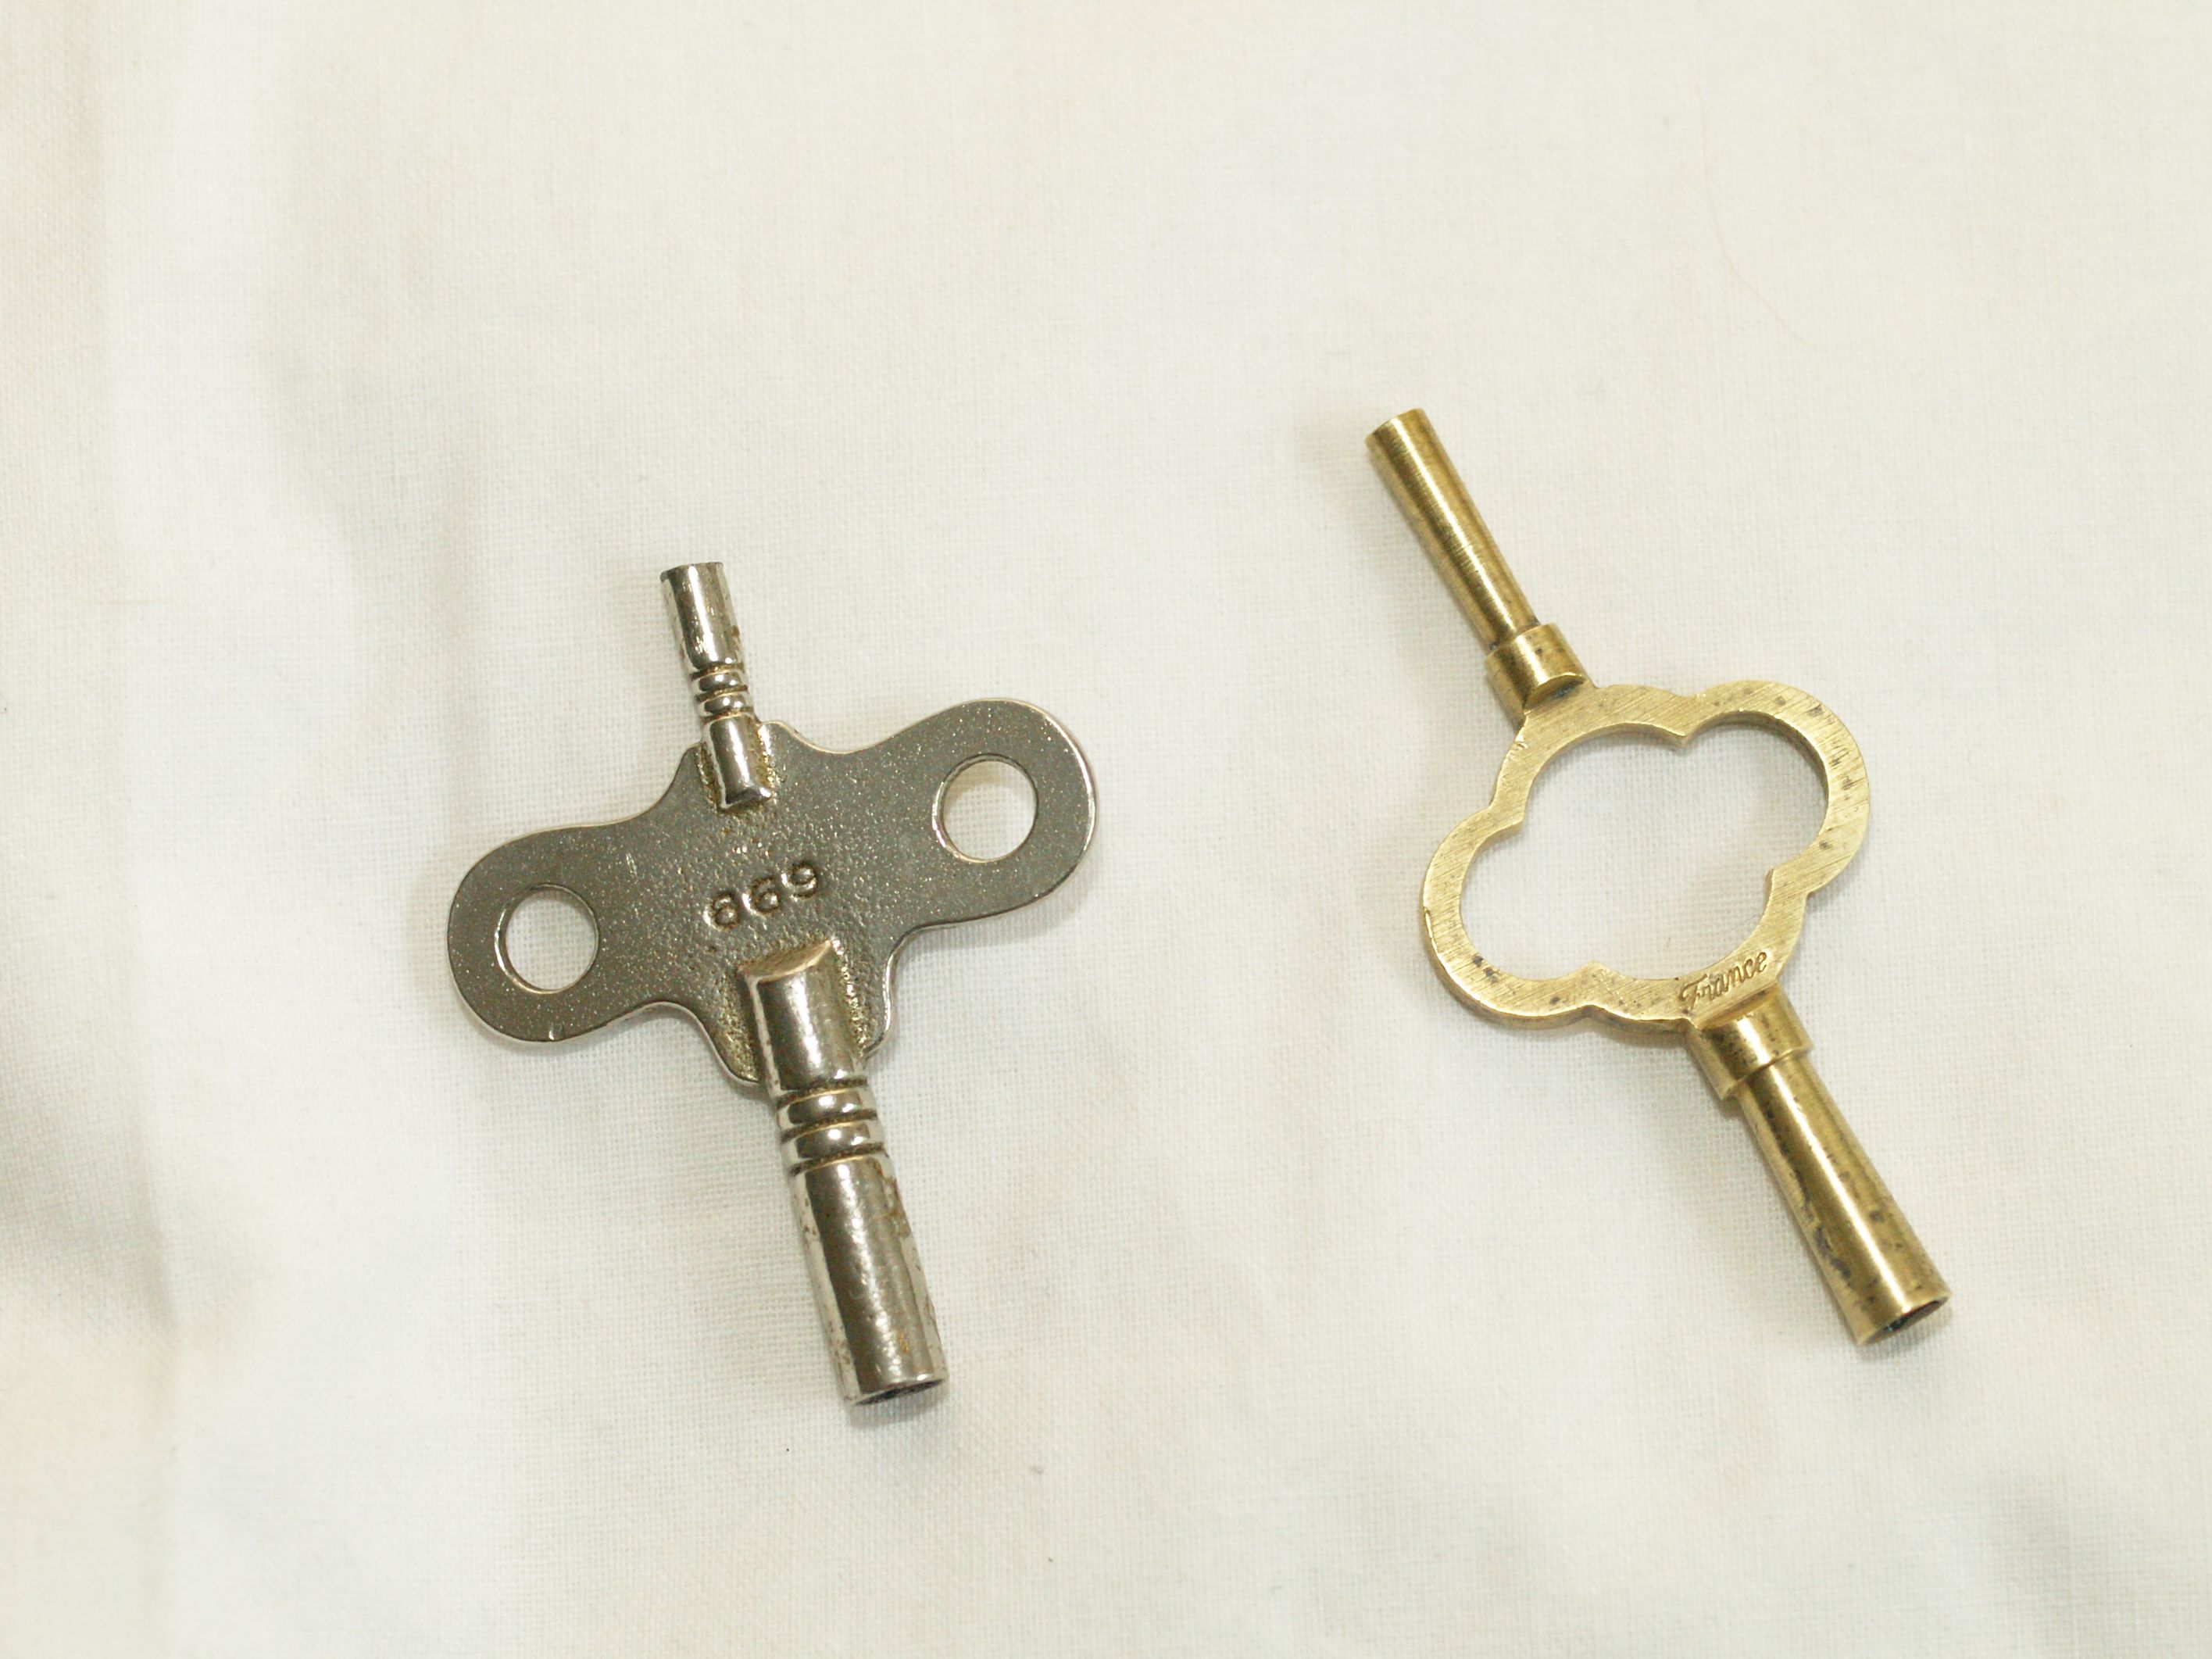 3.25 mm & 1.75 mm Brass Double Ended Carriage Clock Winding Key No.4 